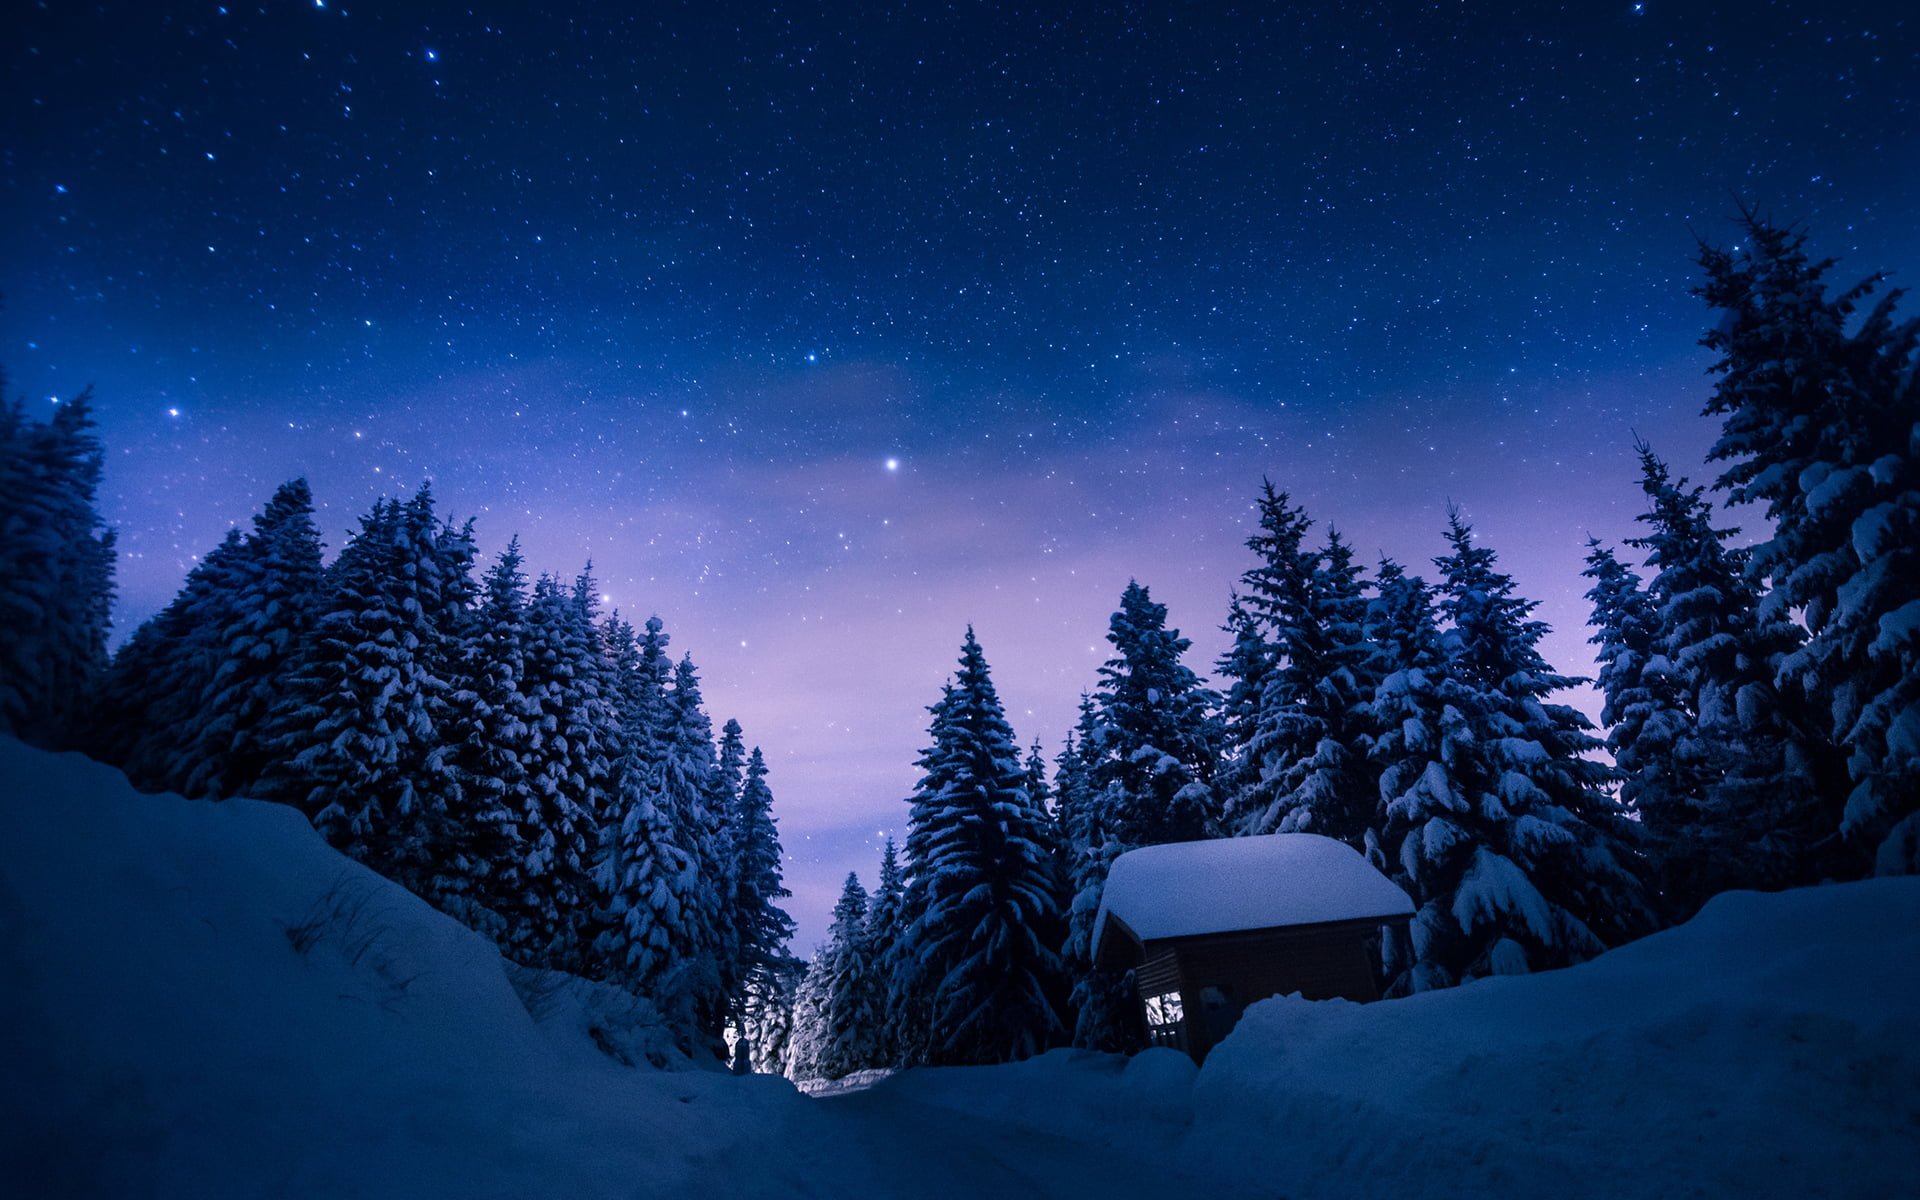 pine trees, nature, winter, snow, night, stars, forest, cabin